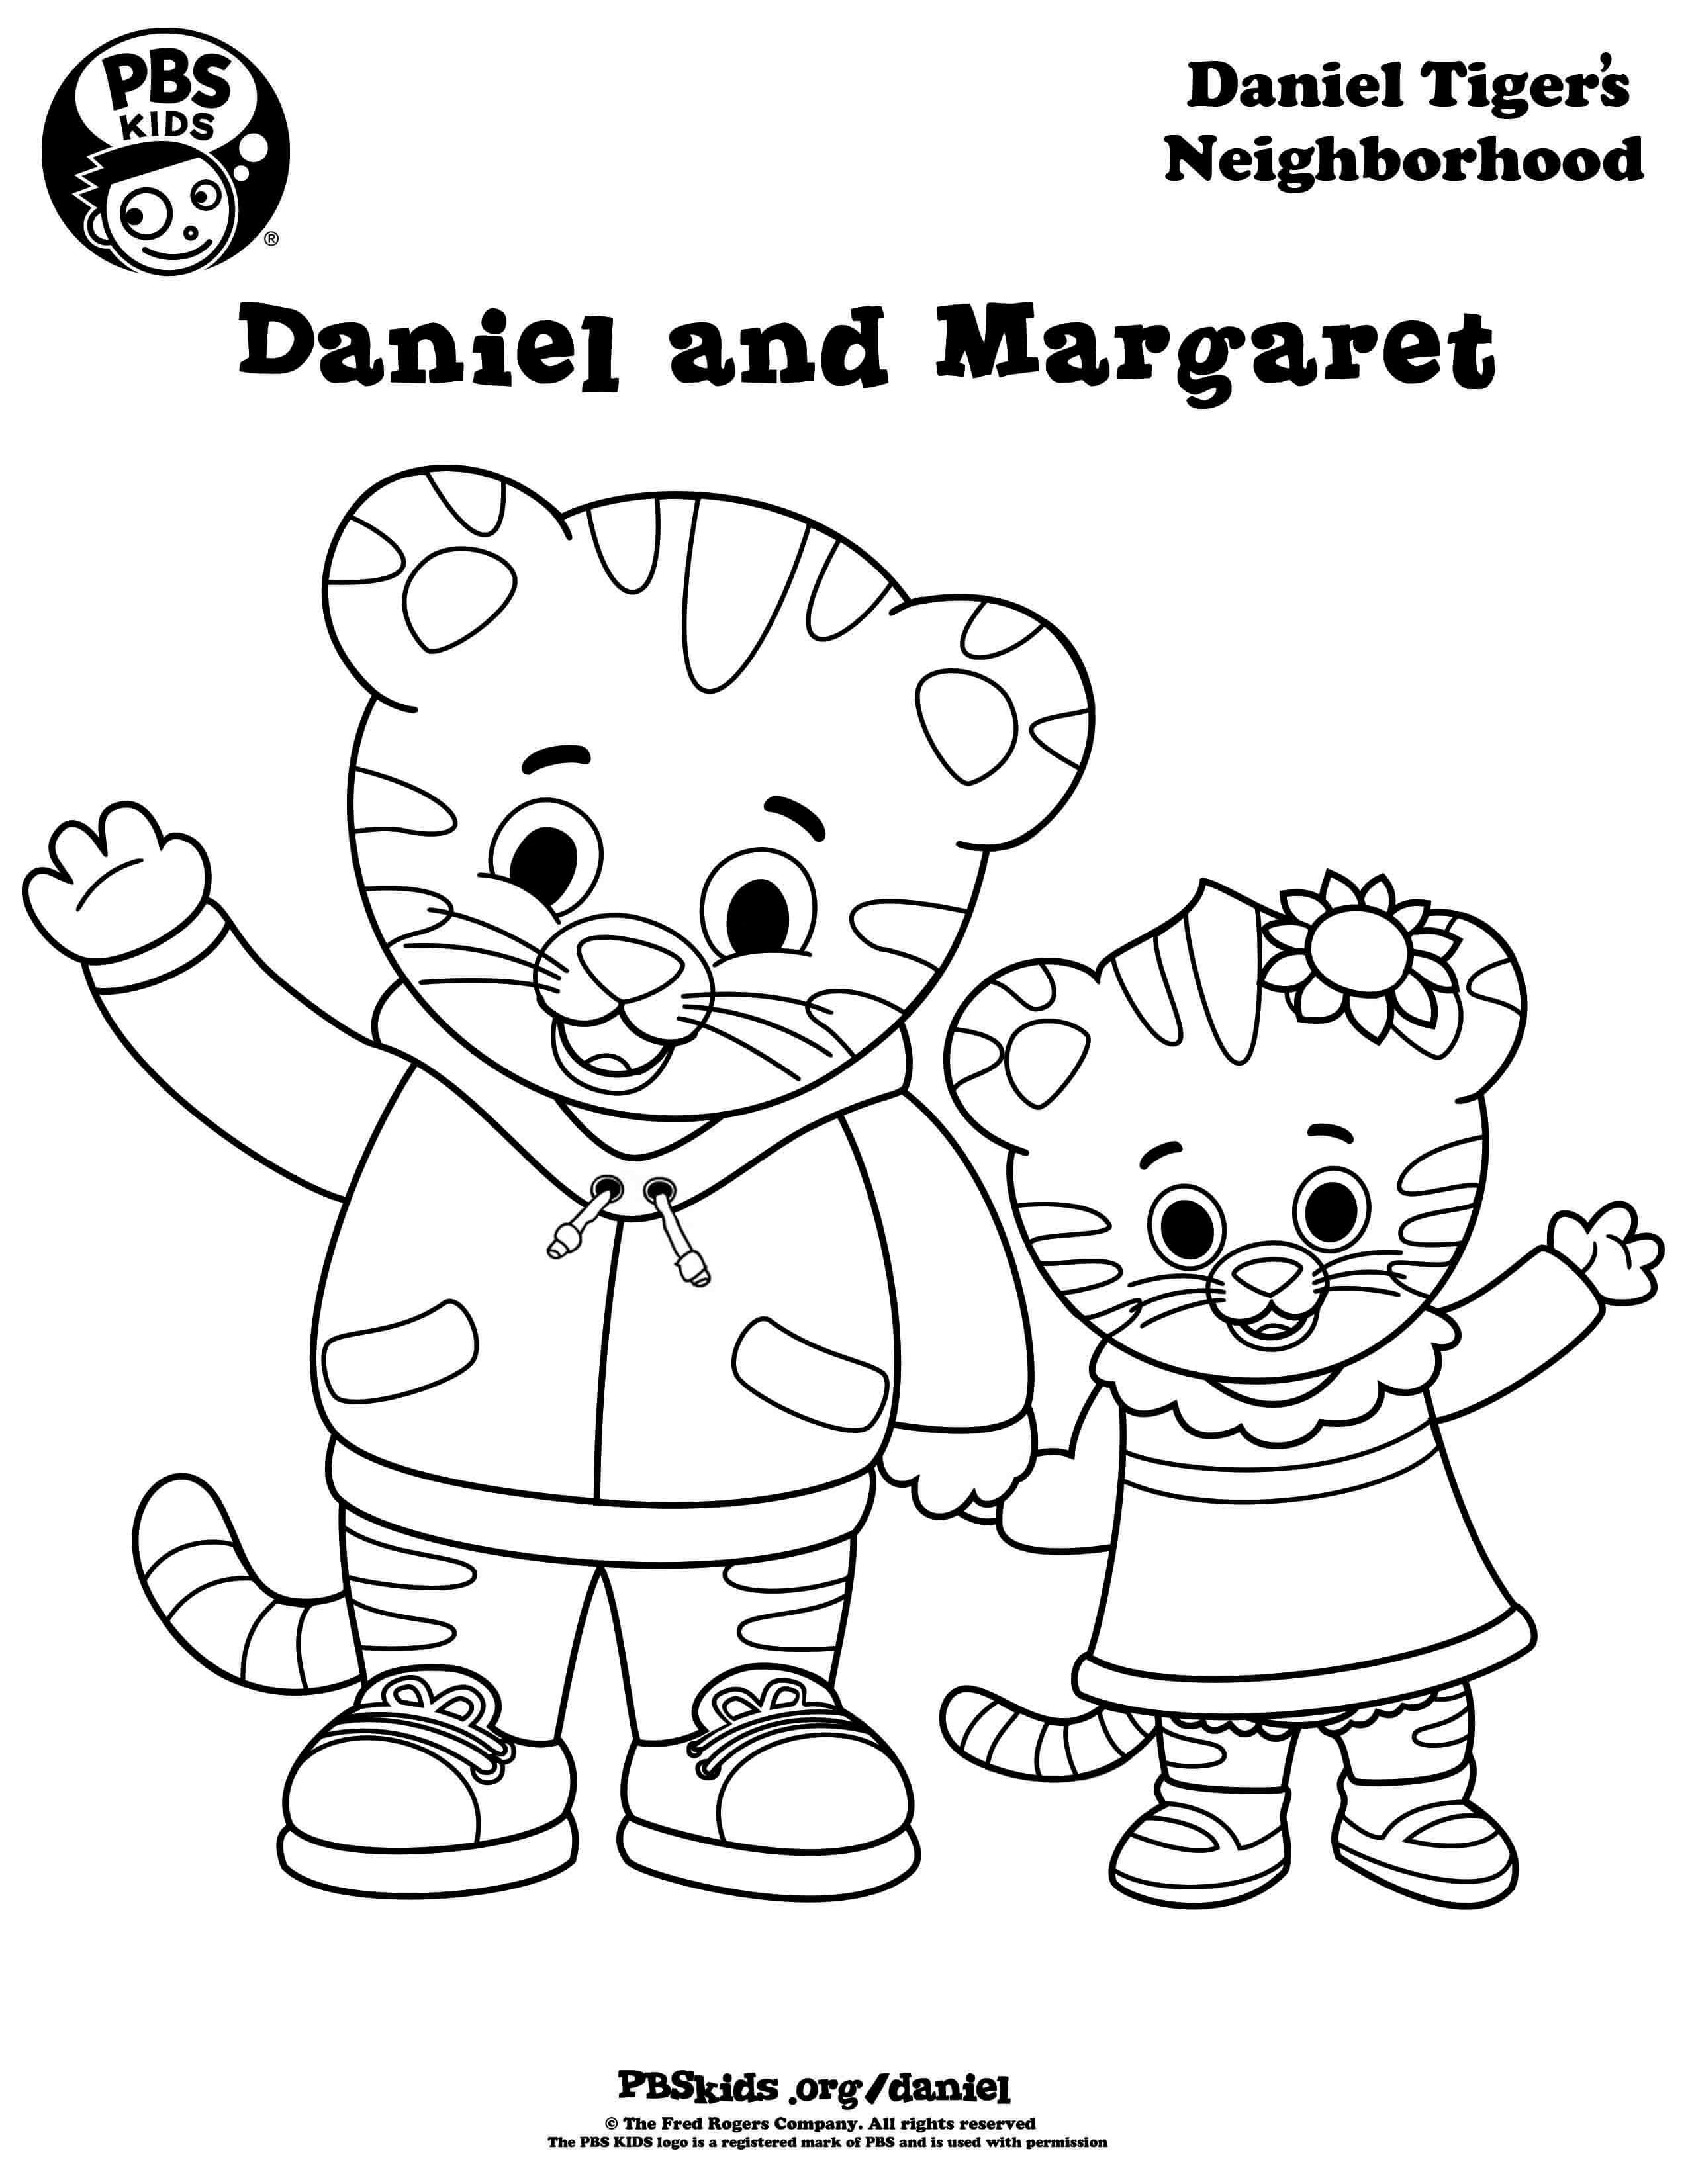 Daniel Tiger and Margaret Coloring Page